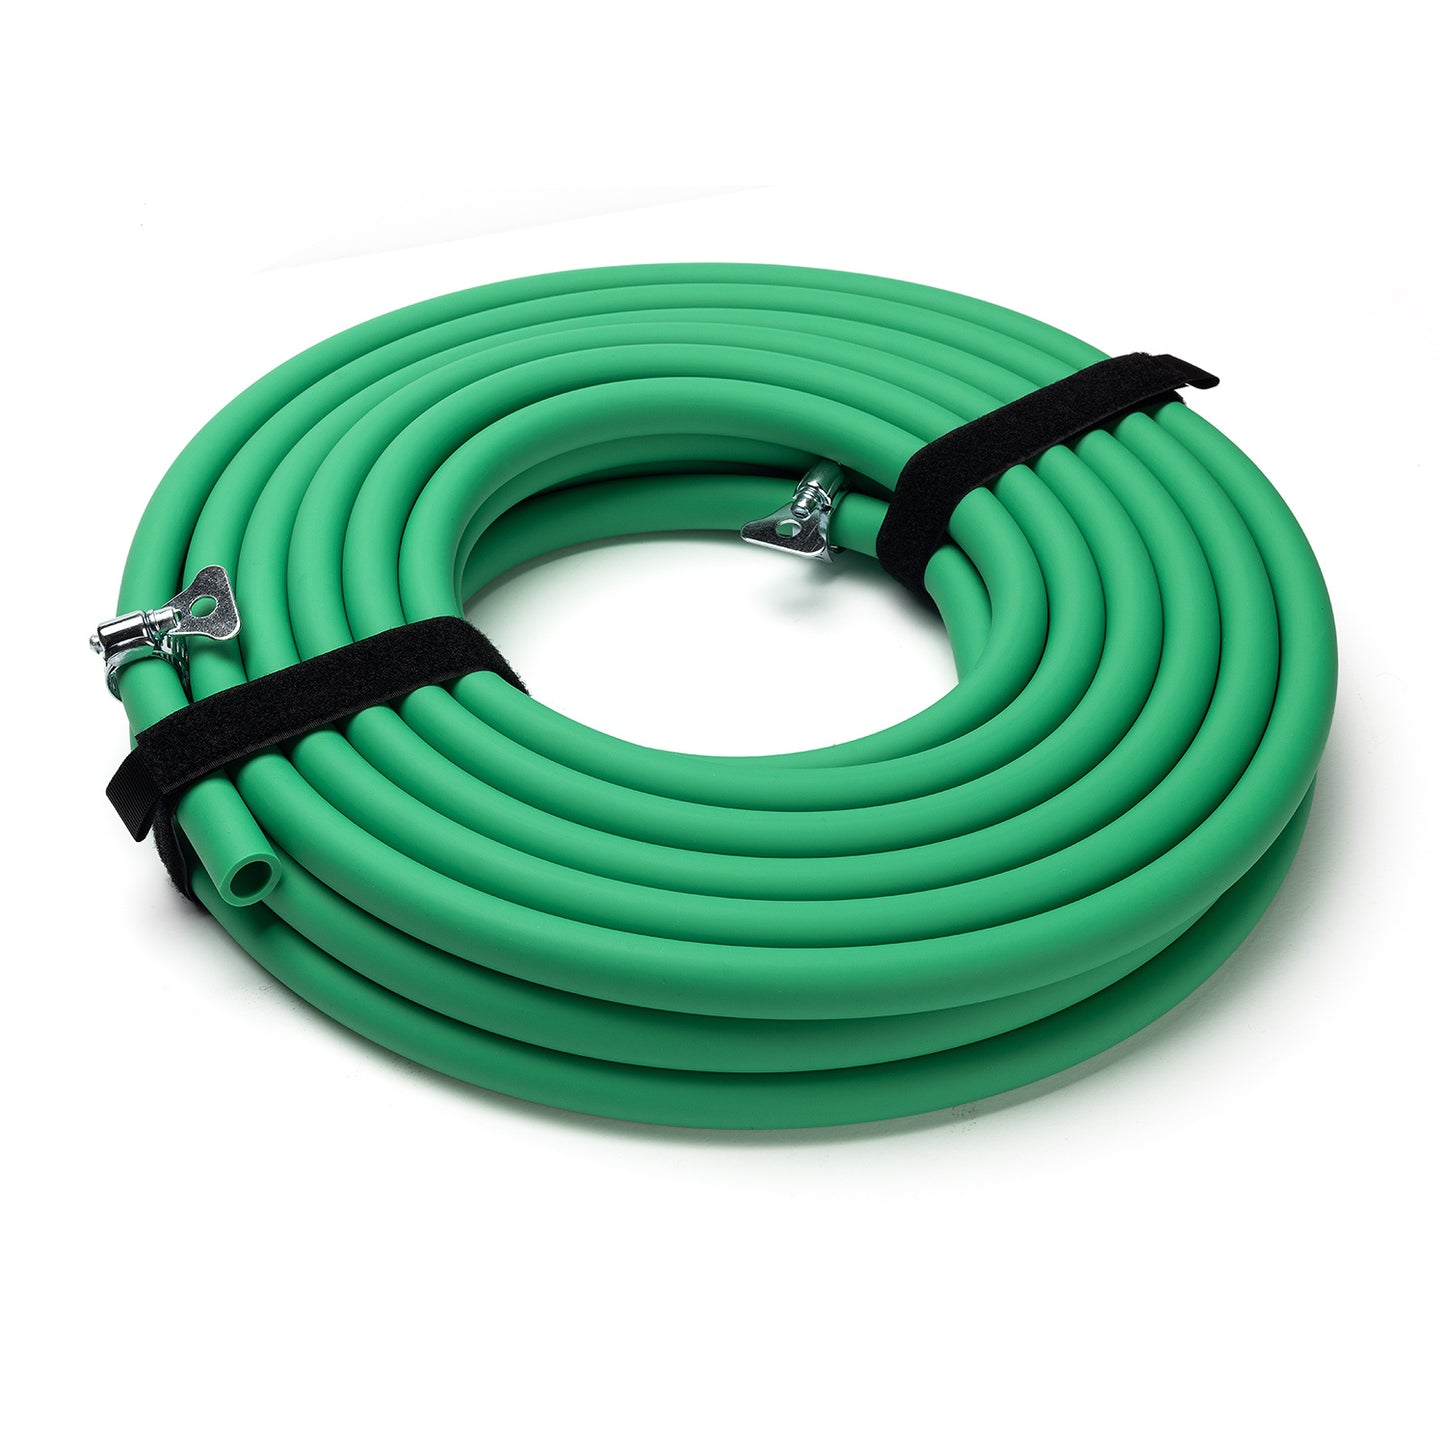 SPI Drain Down Hose Kit, 15-Meter Pipe with 2 Hose Clamps